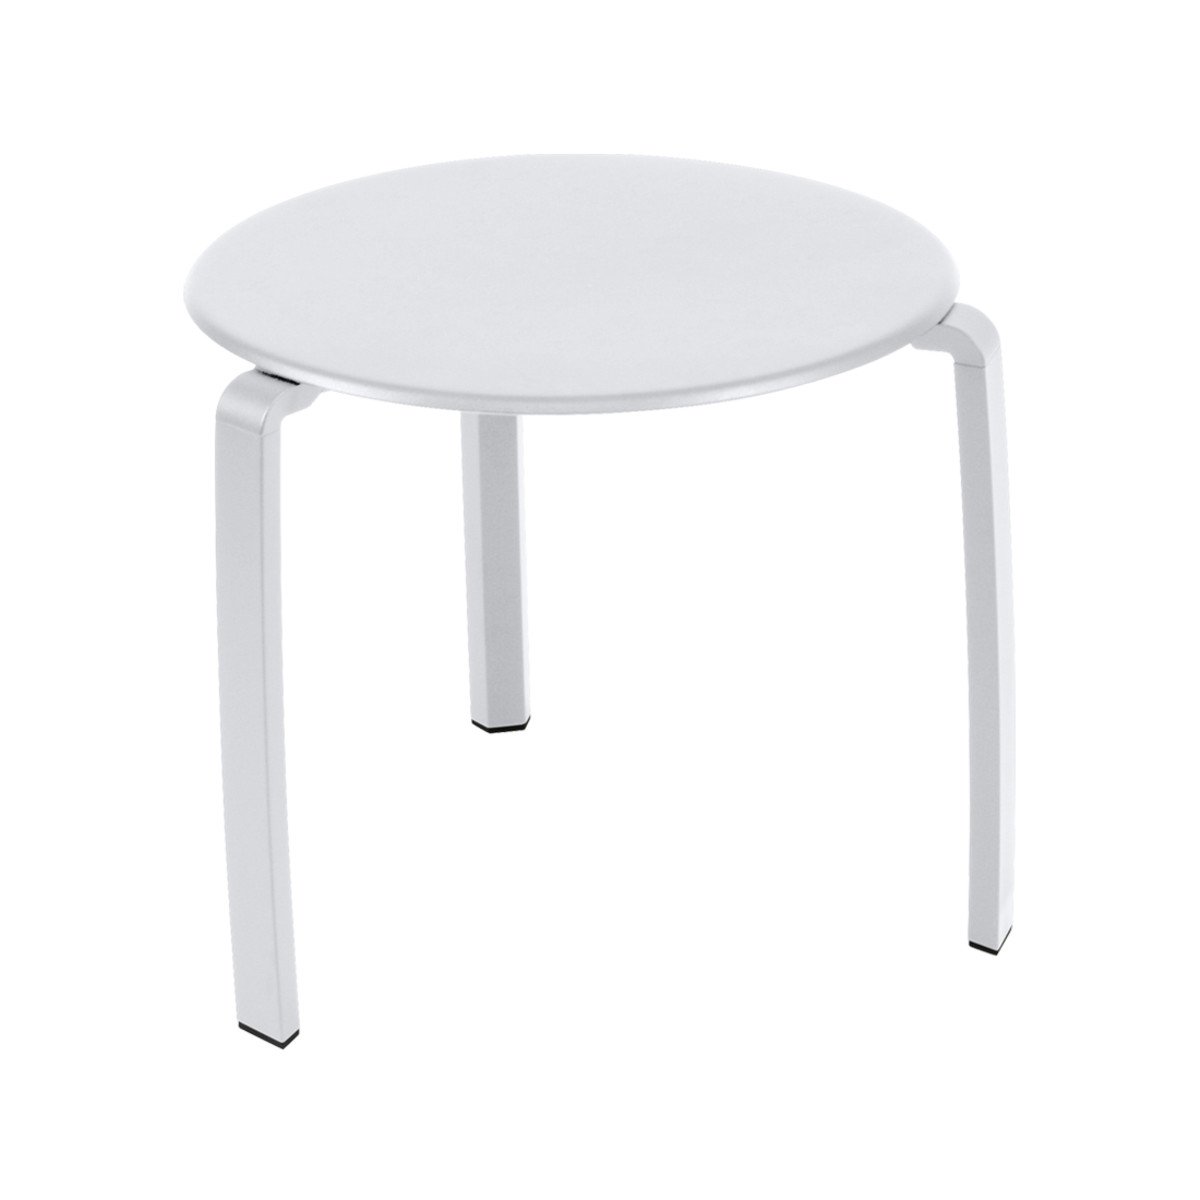 Alize Table White